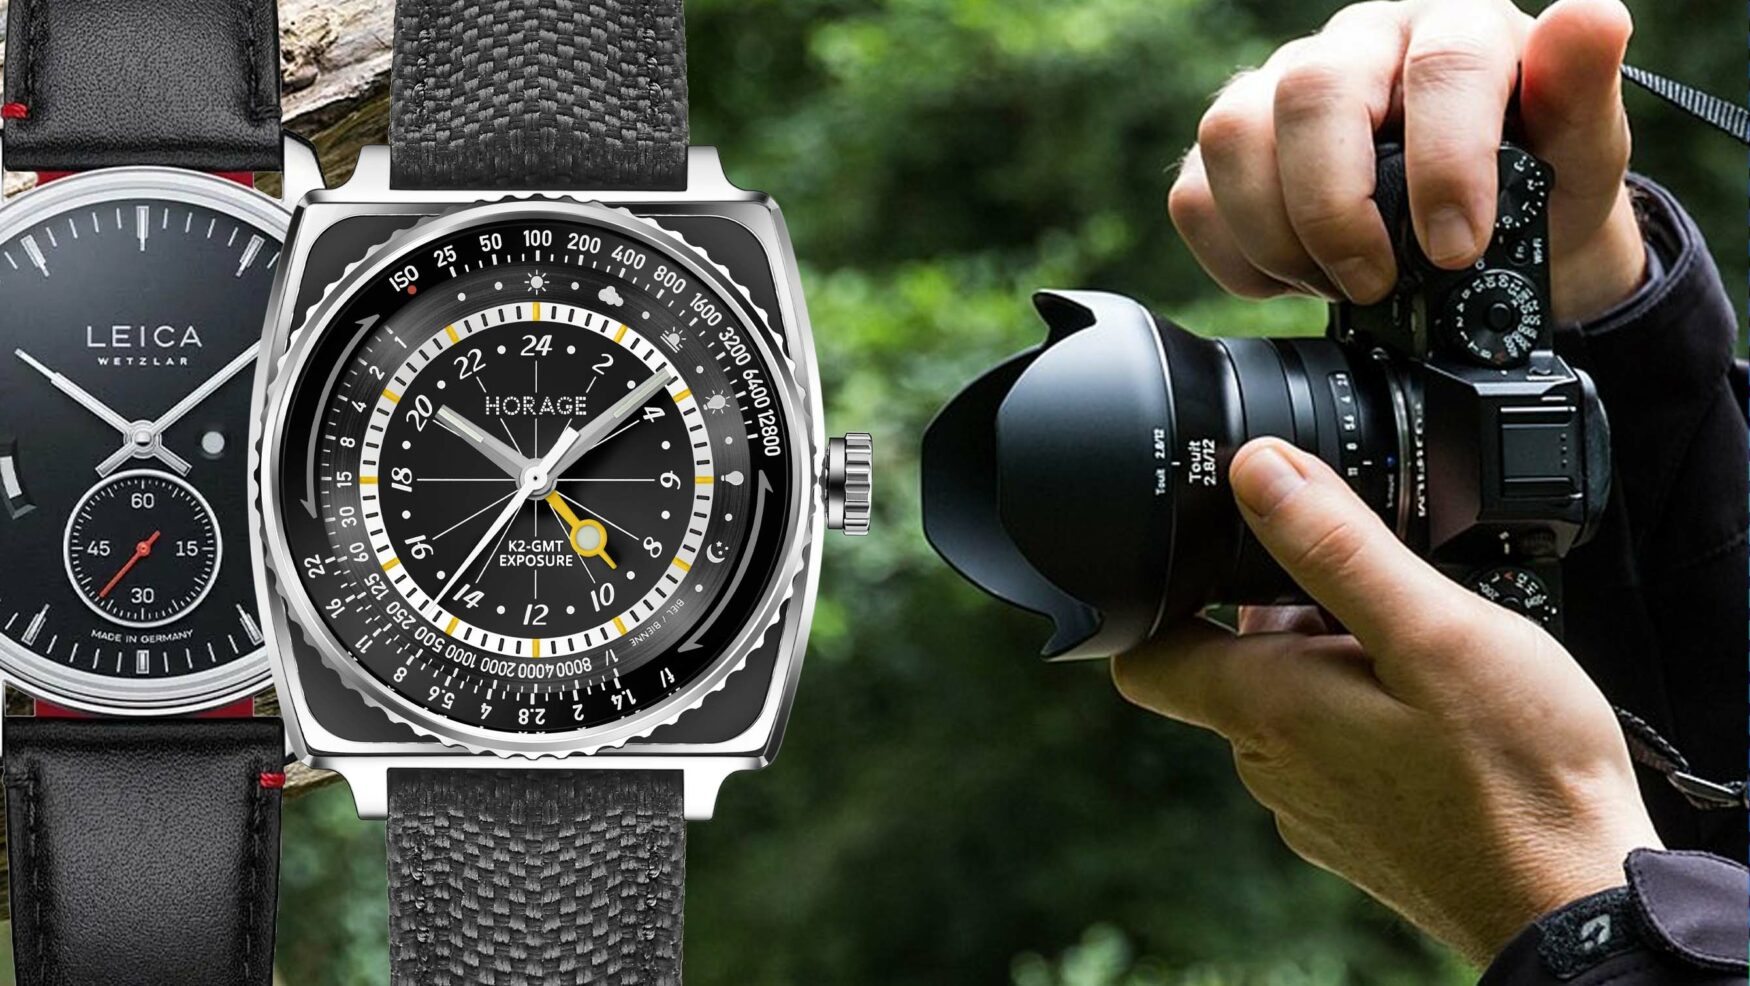 5 of the best watches for photography nerds